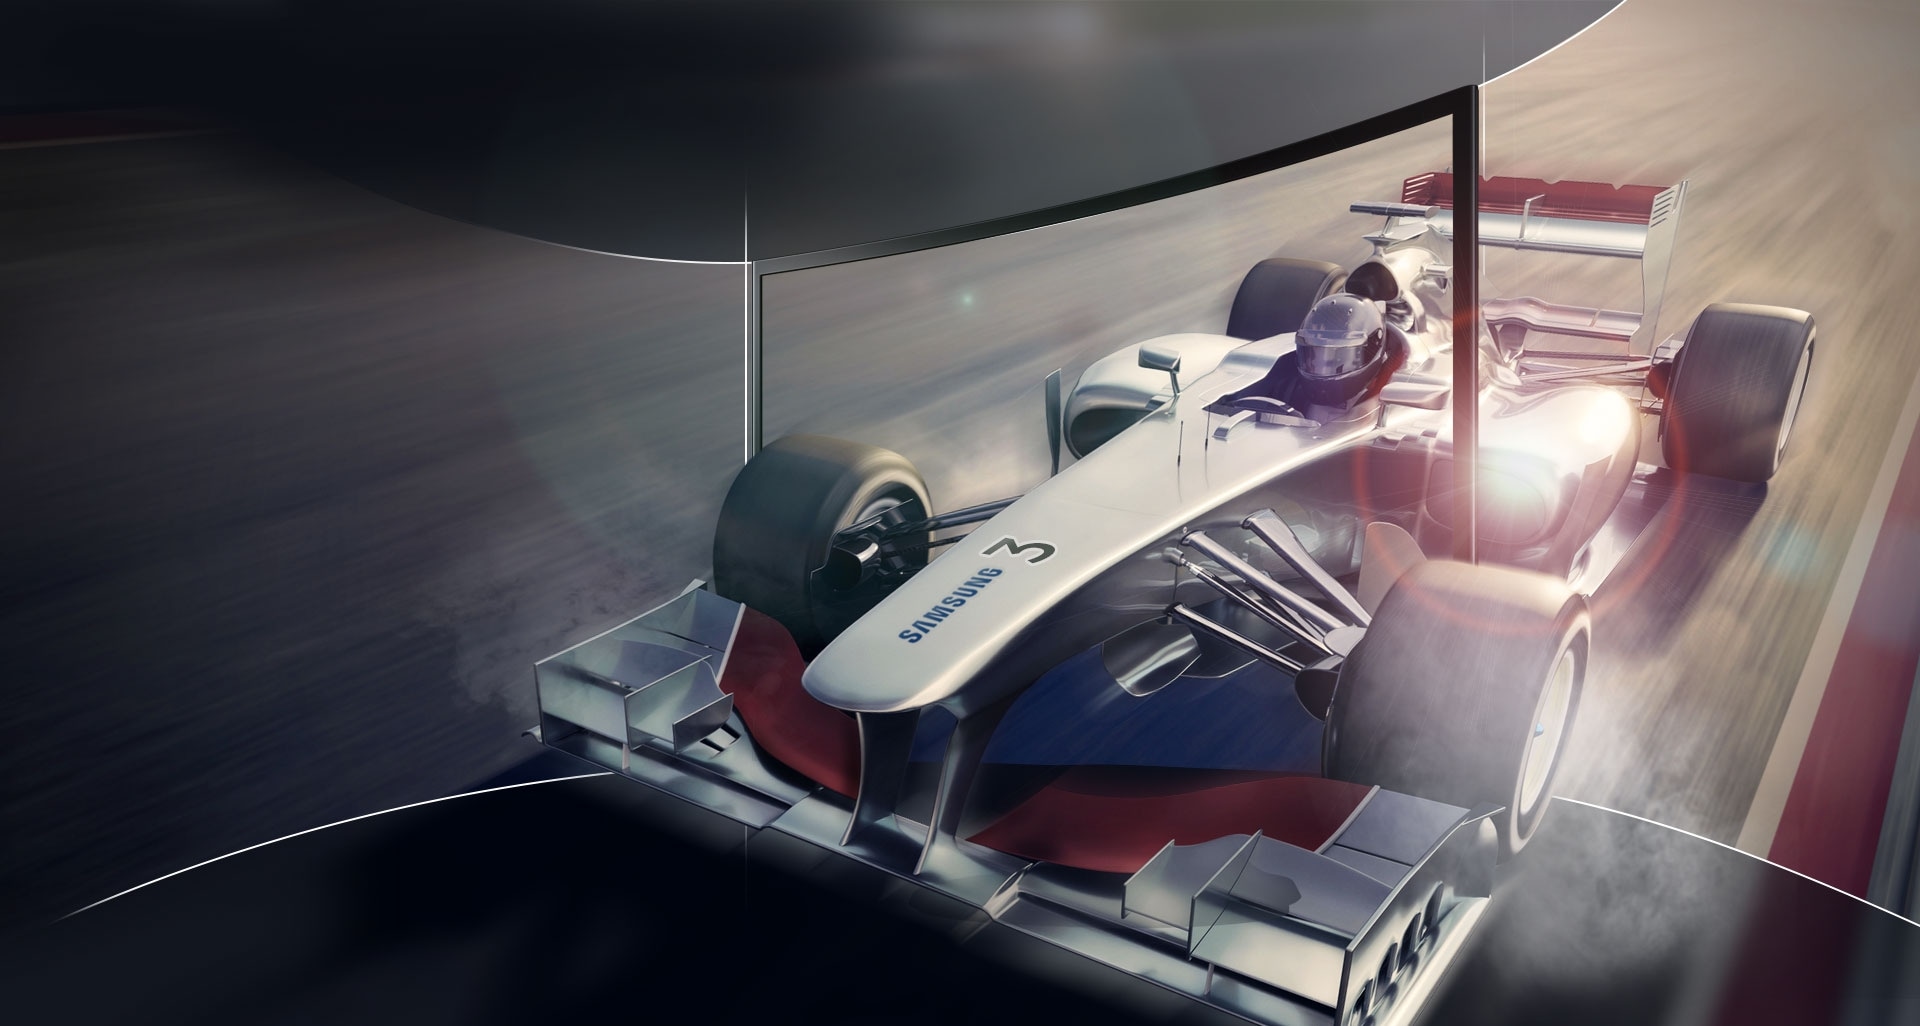 CF390 curved monitor with its 1800mm radius of arc for the most deep immersive viewing experience. A car racing content is displayed on the curved monitor